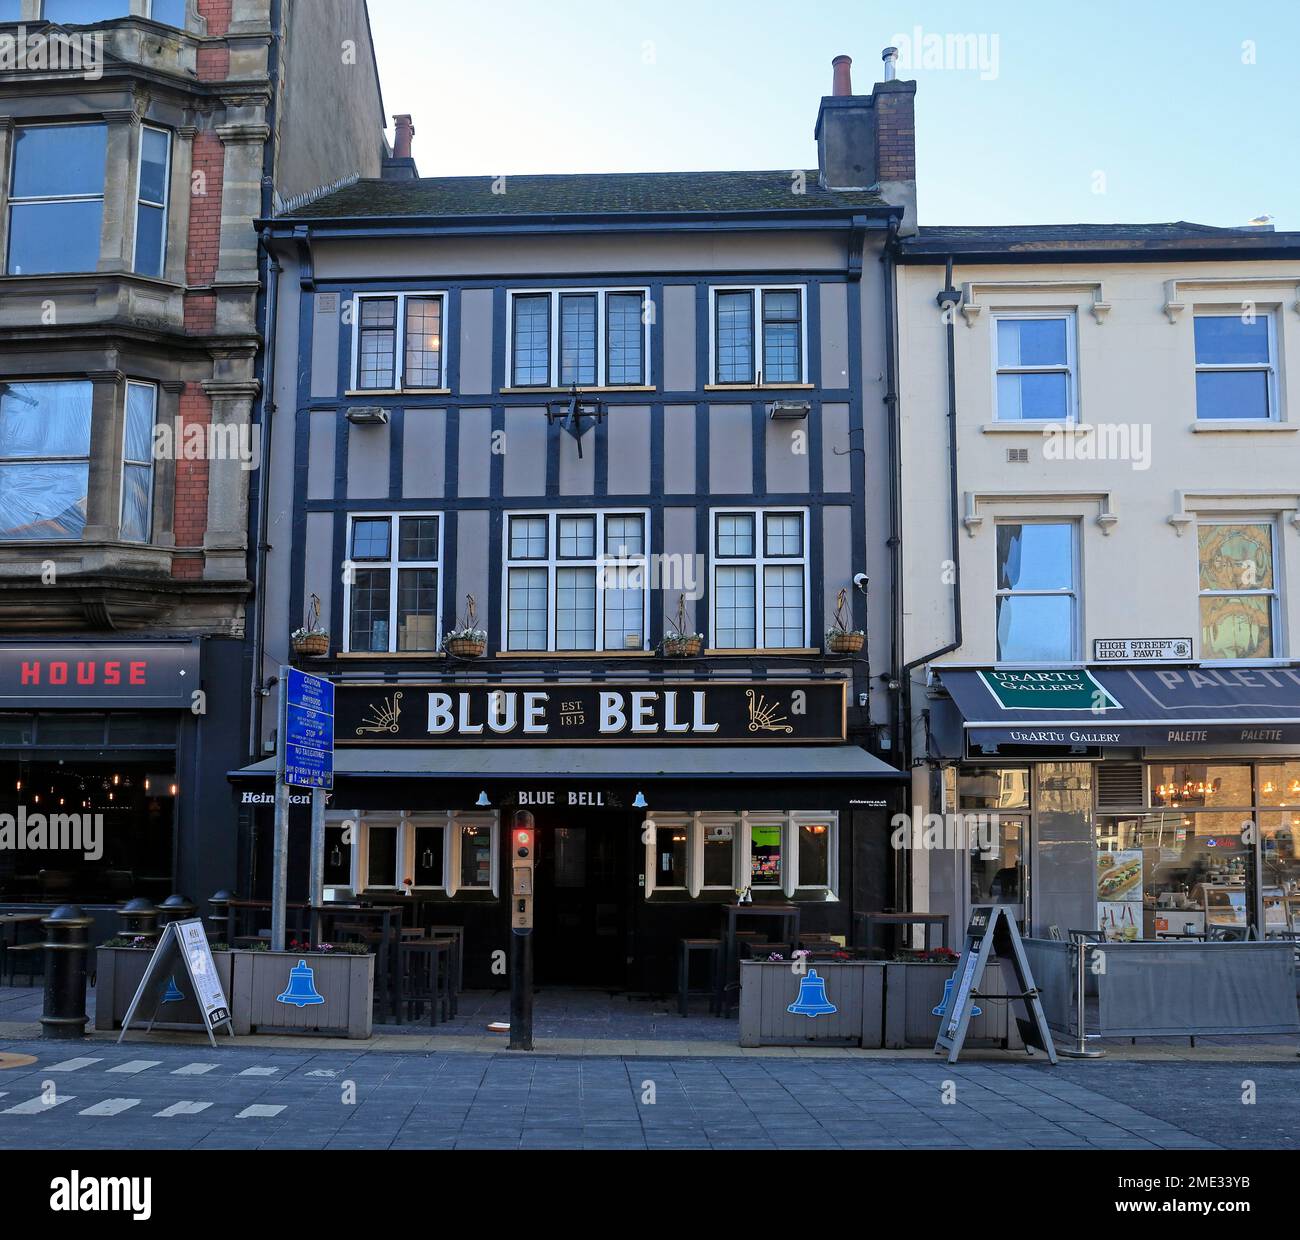 The Blue Bell Public House, Formerly The Goat Major, or The Goat. Originally The Blue Bell. Cardiff Centre, taken January 2023. winter. Stock Photo